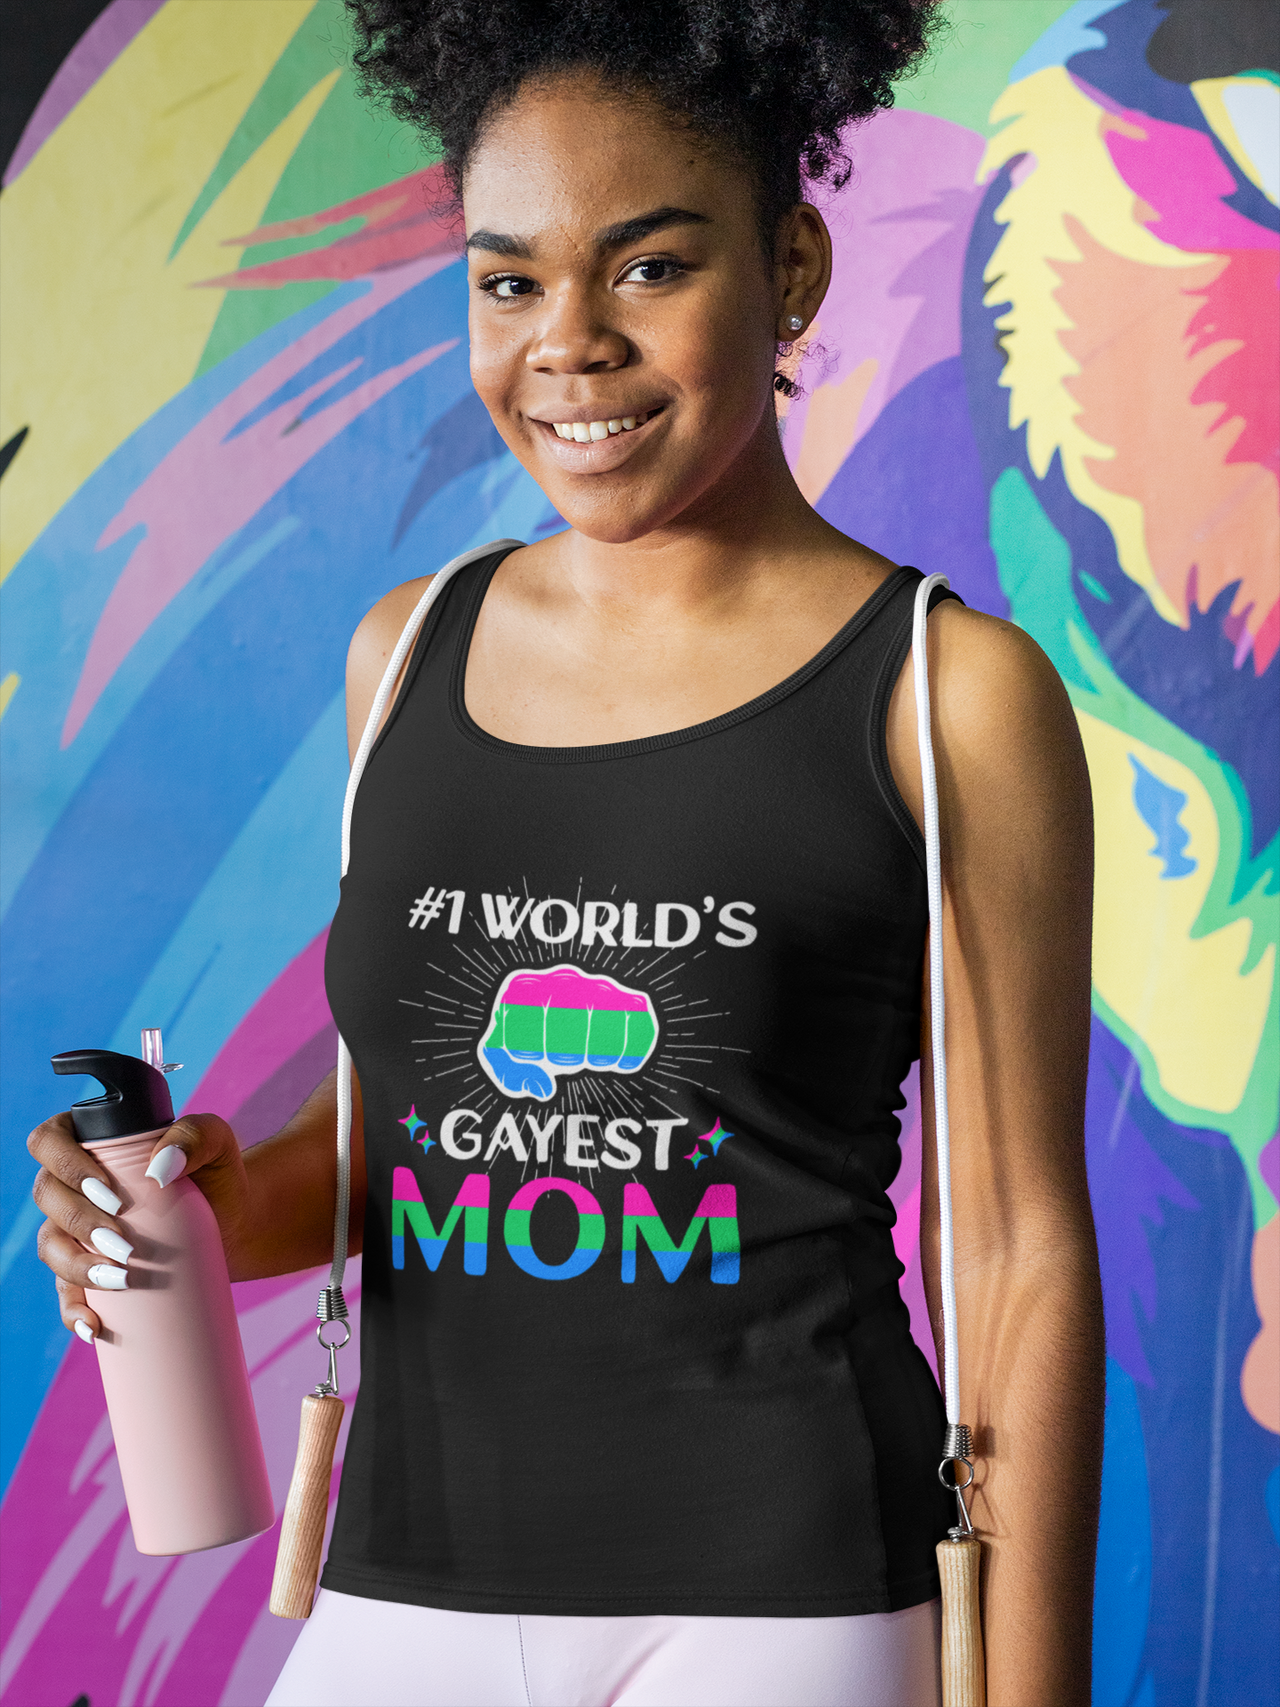 Polysexual Pride Flag Mother's Day Ideal Racerback Tank - #1 World's Gayest Mom SHAVA CO